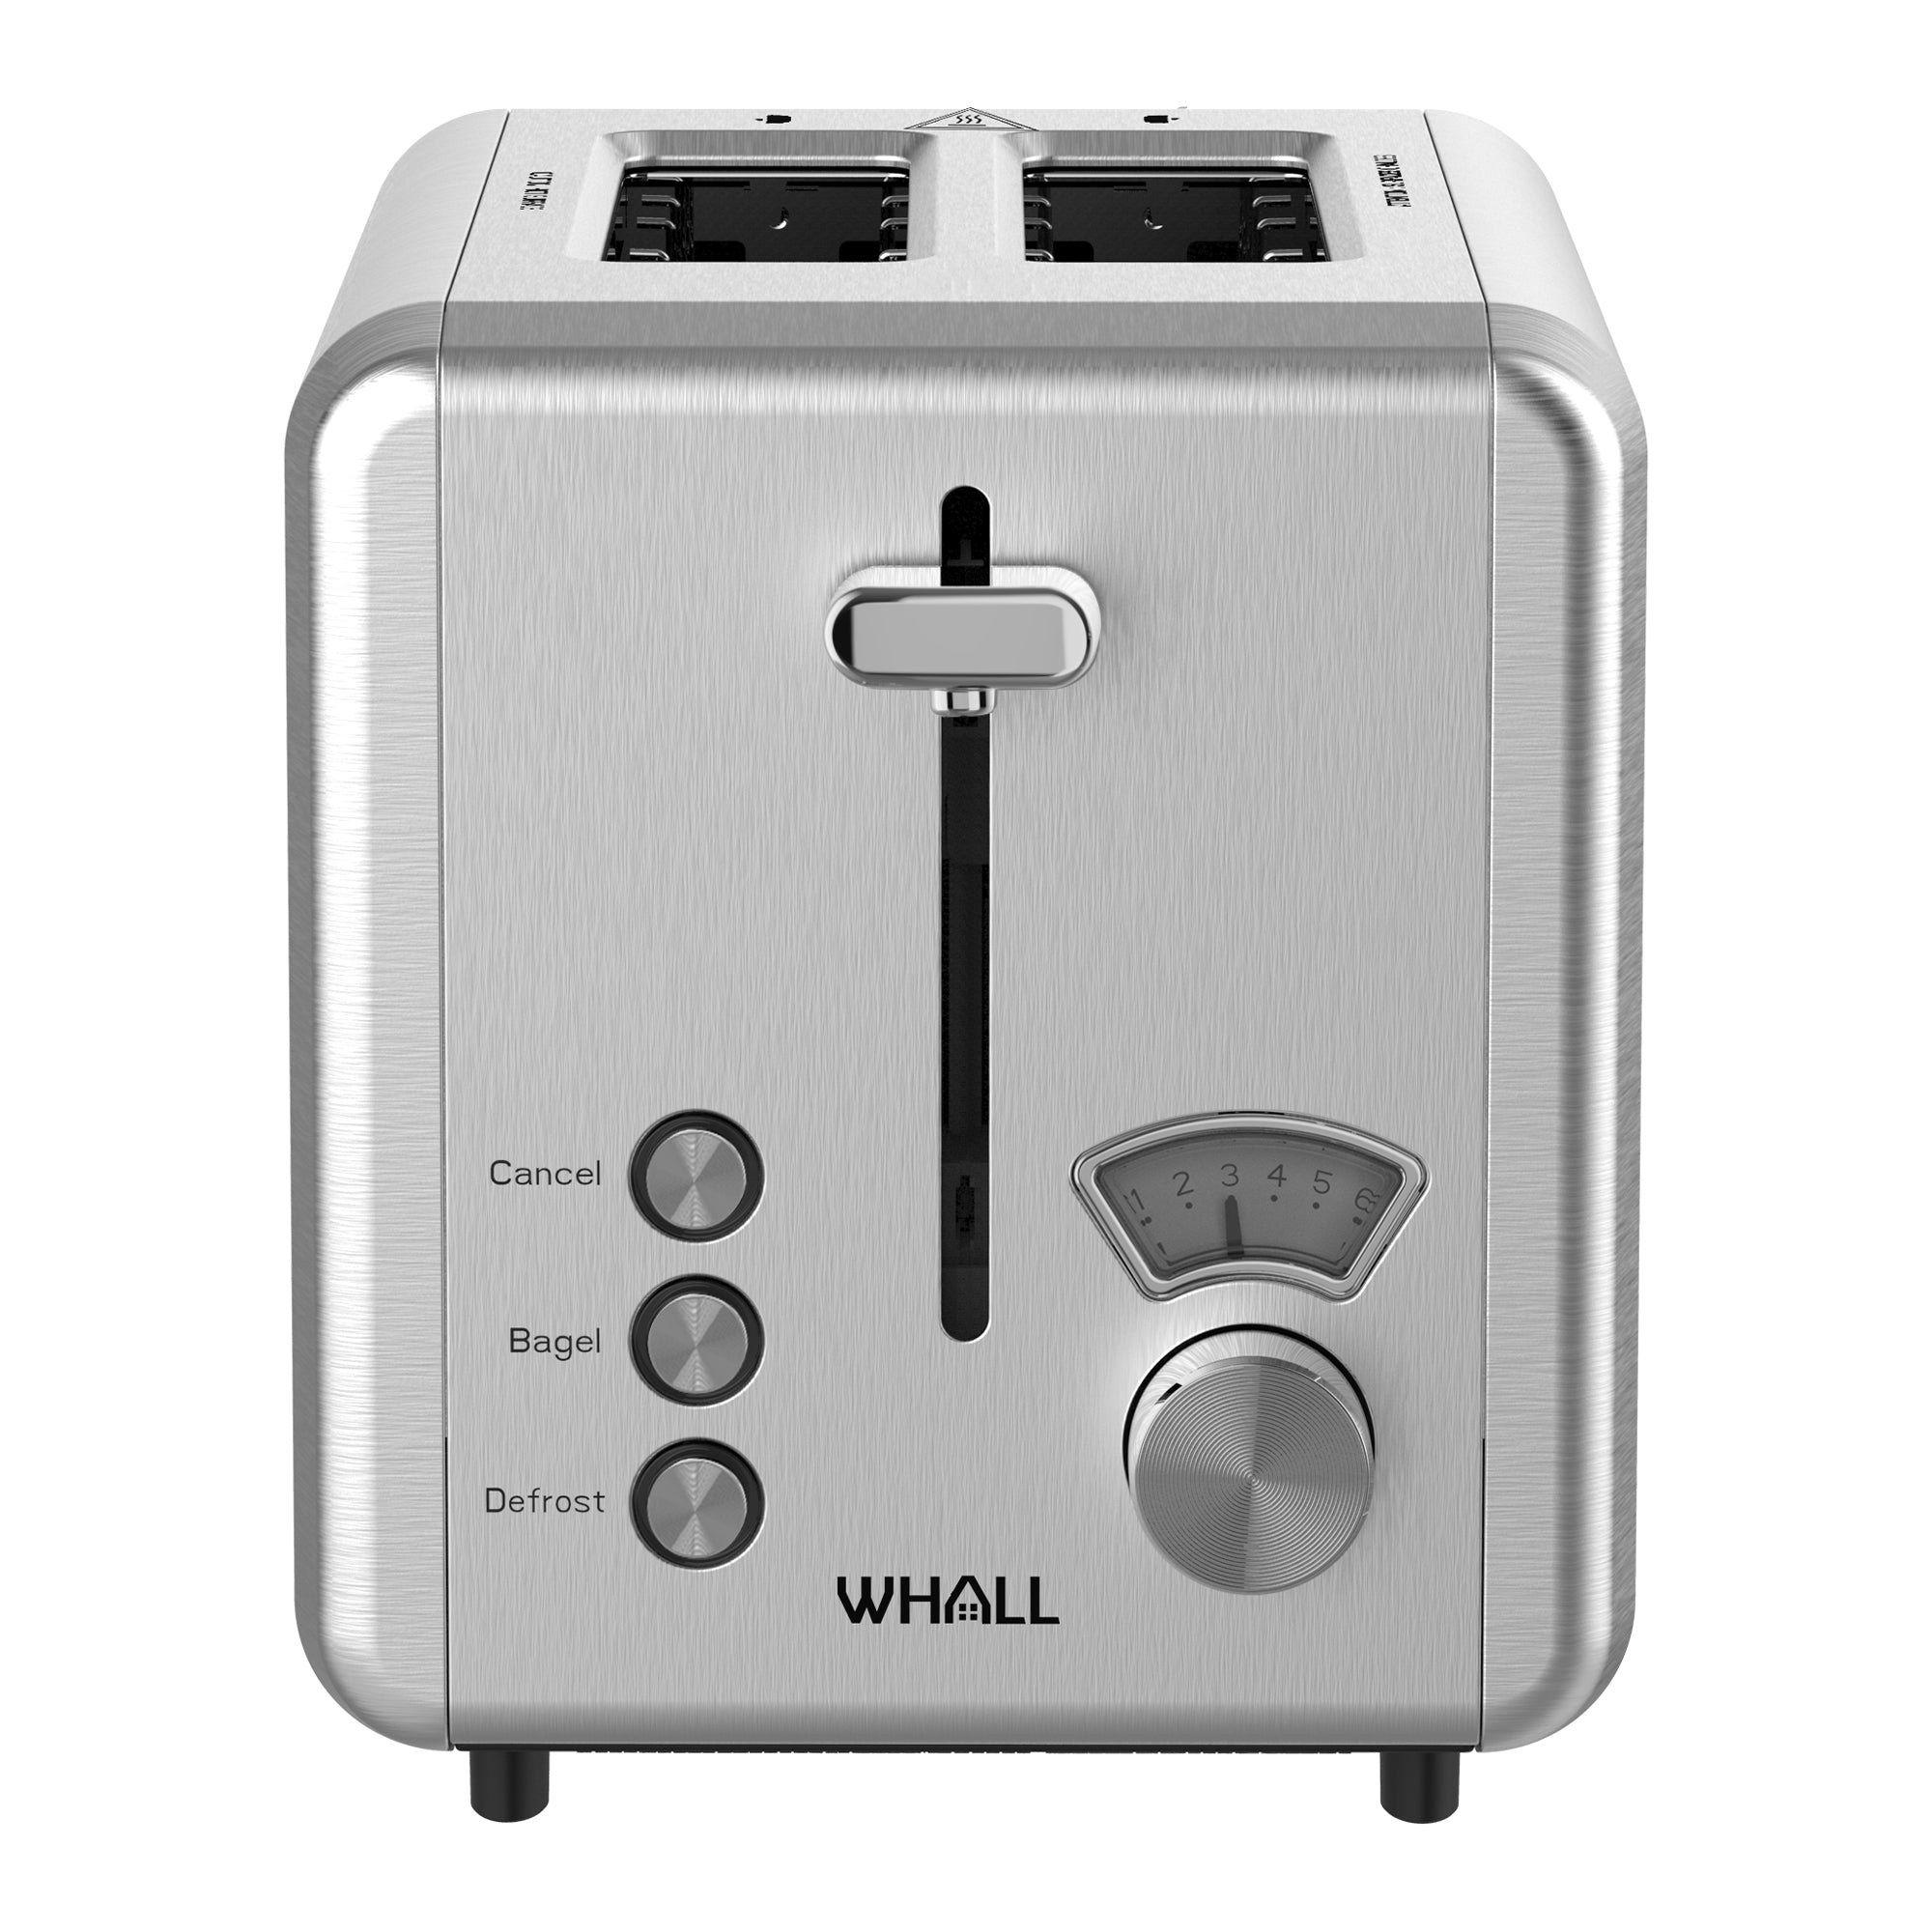 WHALL® Knob Toaster 2 Slice | Stainless Steel, Digital Timer, Sound | 6 Bread Types & Shades